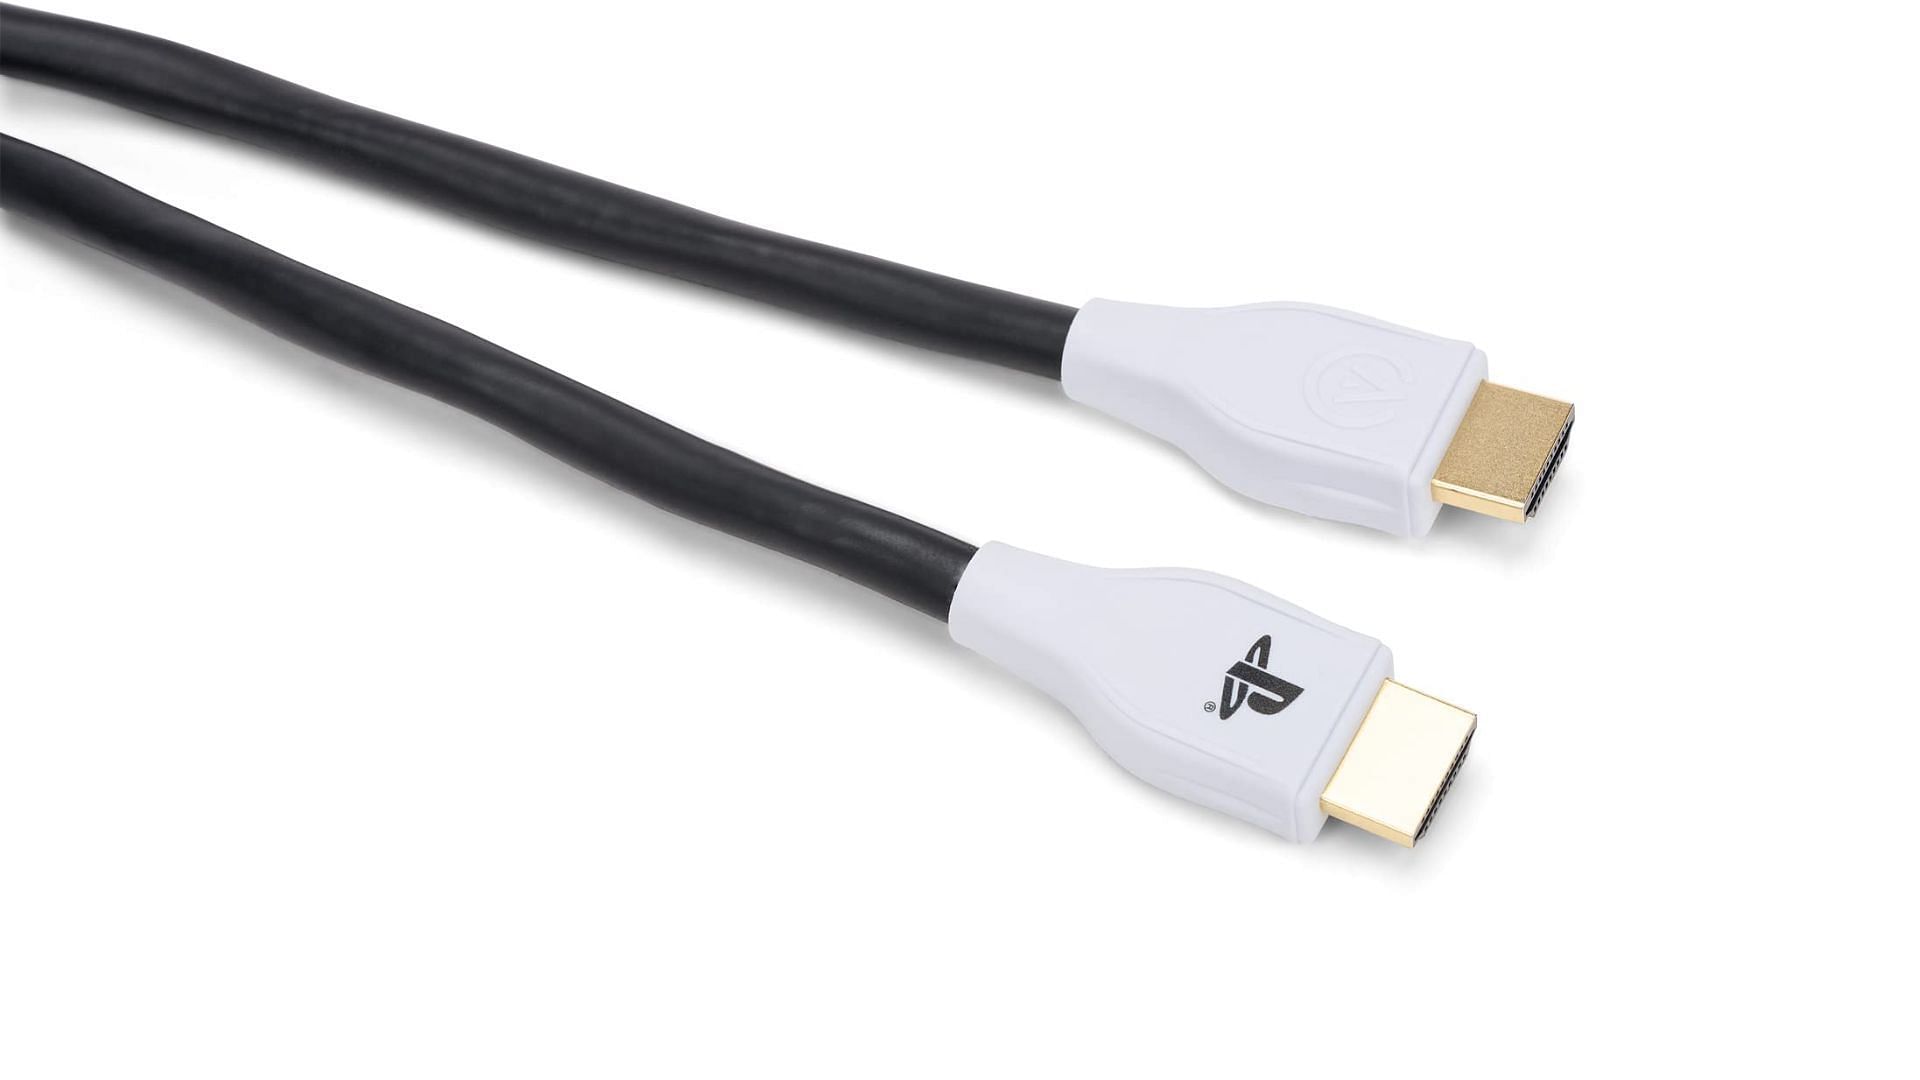 Official HDMI cable for PS5 by Sony (Image via Sony/Amazon)